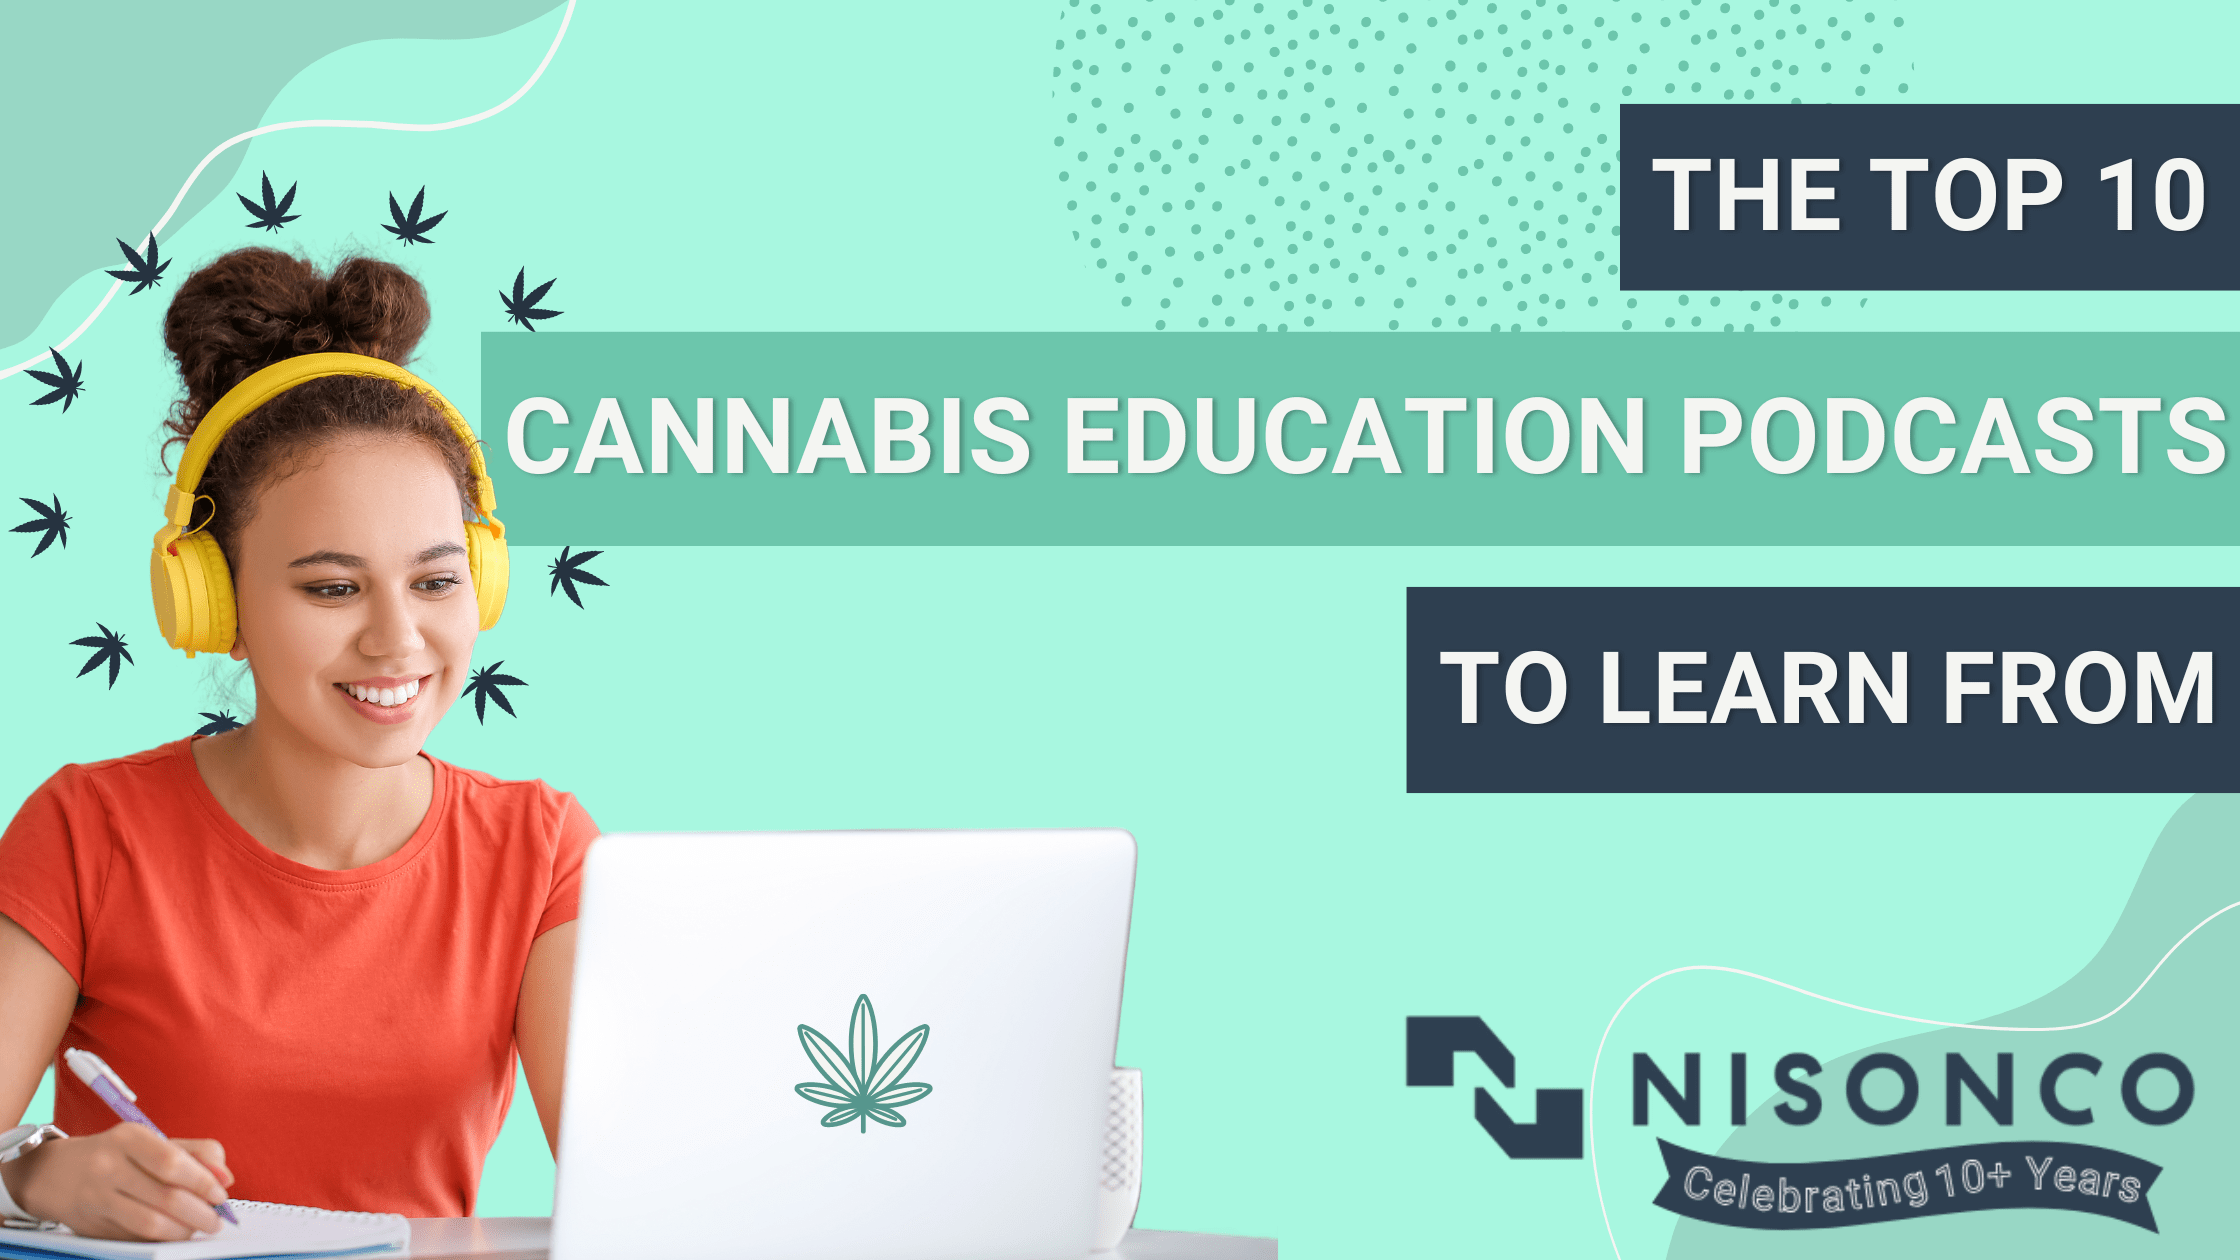 The text The Top 10 Cannabis Education Podcasts to Learn From is to the right of a young woman in an orange shirt and yellow headphones sitting at a laptop with a cannabis icon in place of the logo. A wreath of cannabis leaves floats around her head.